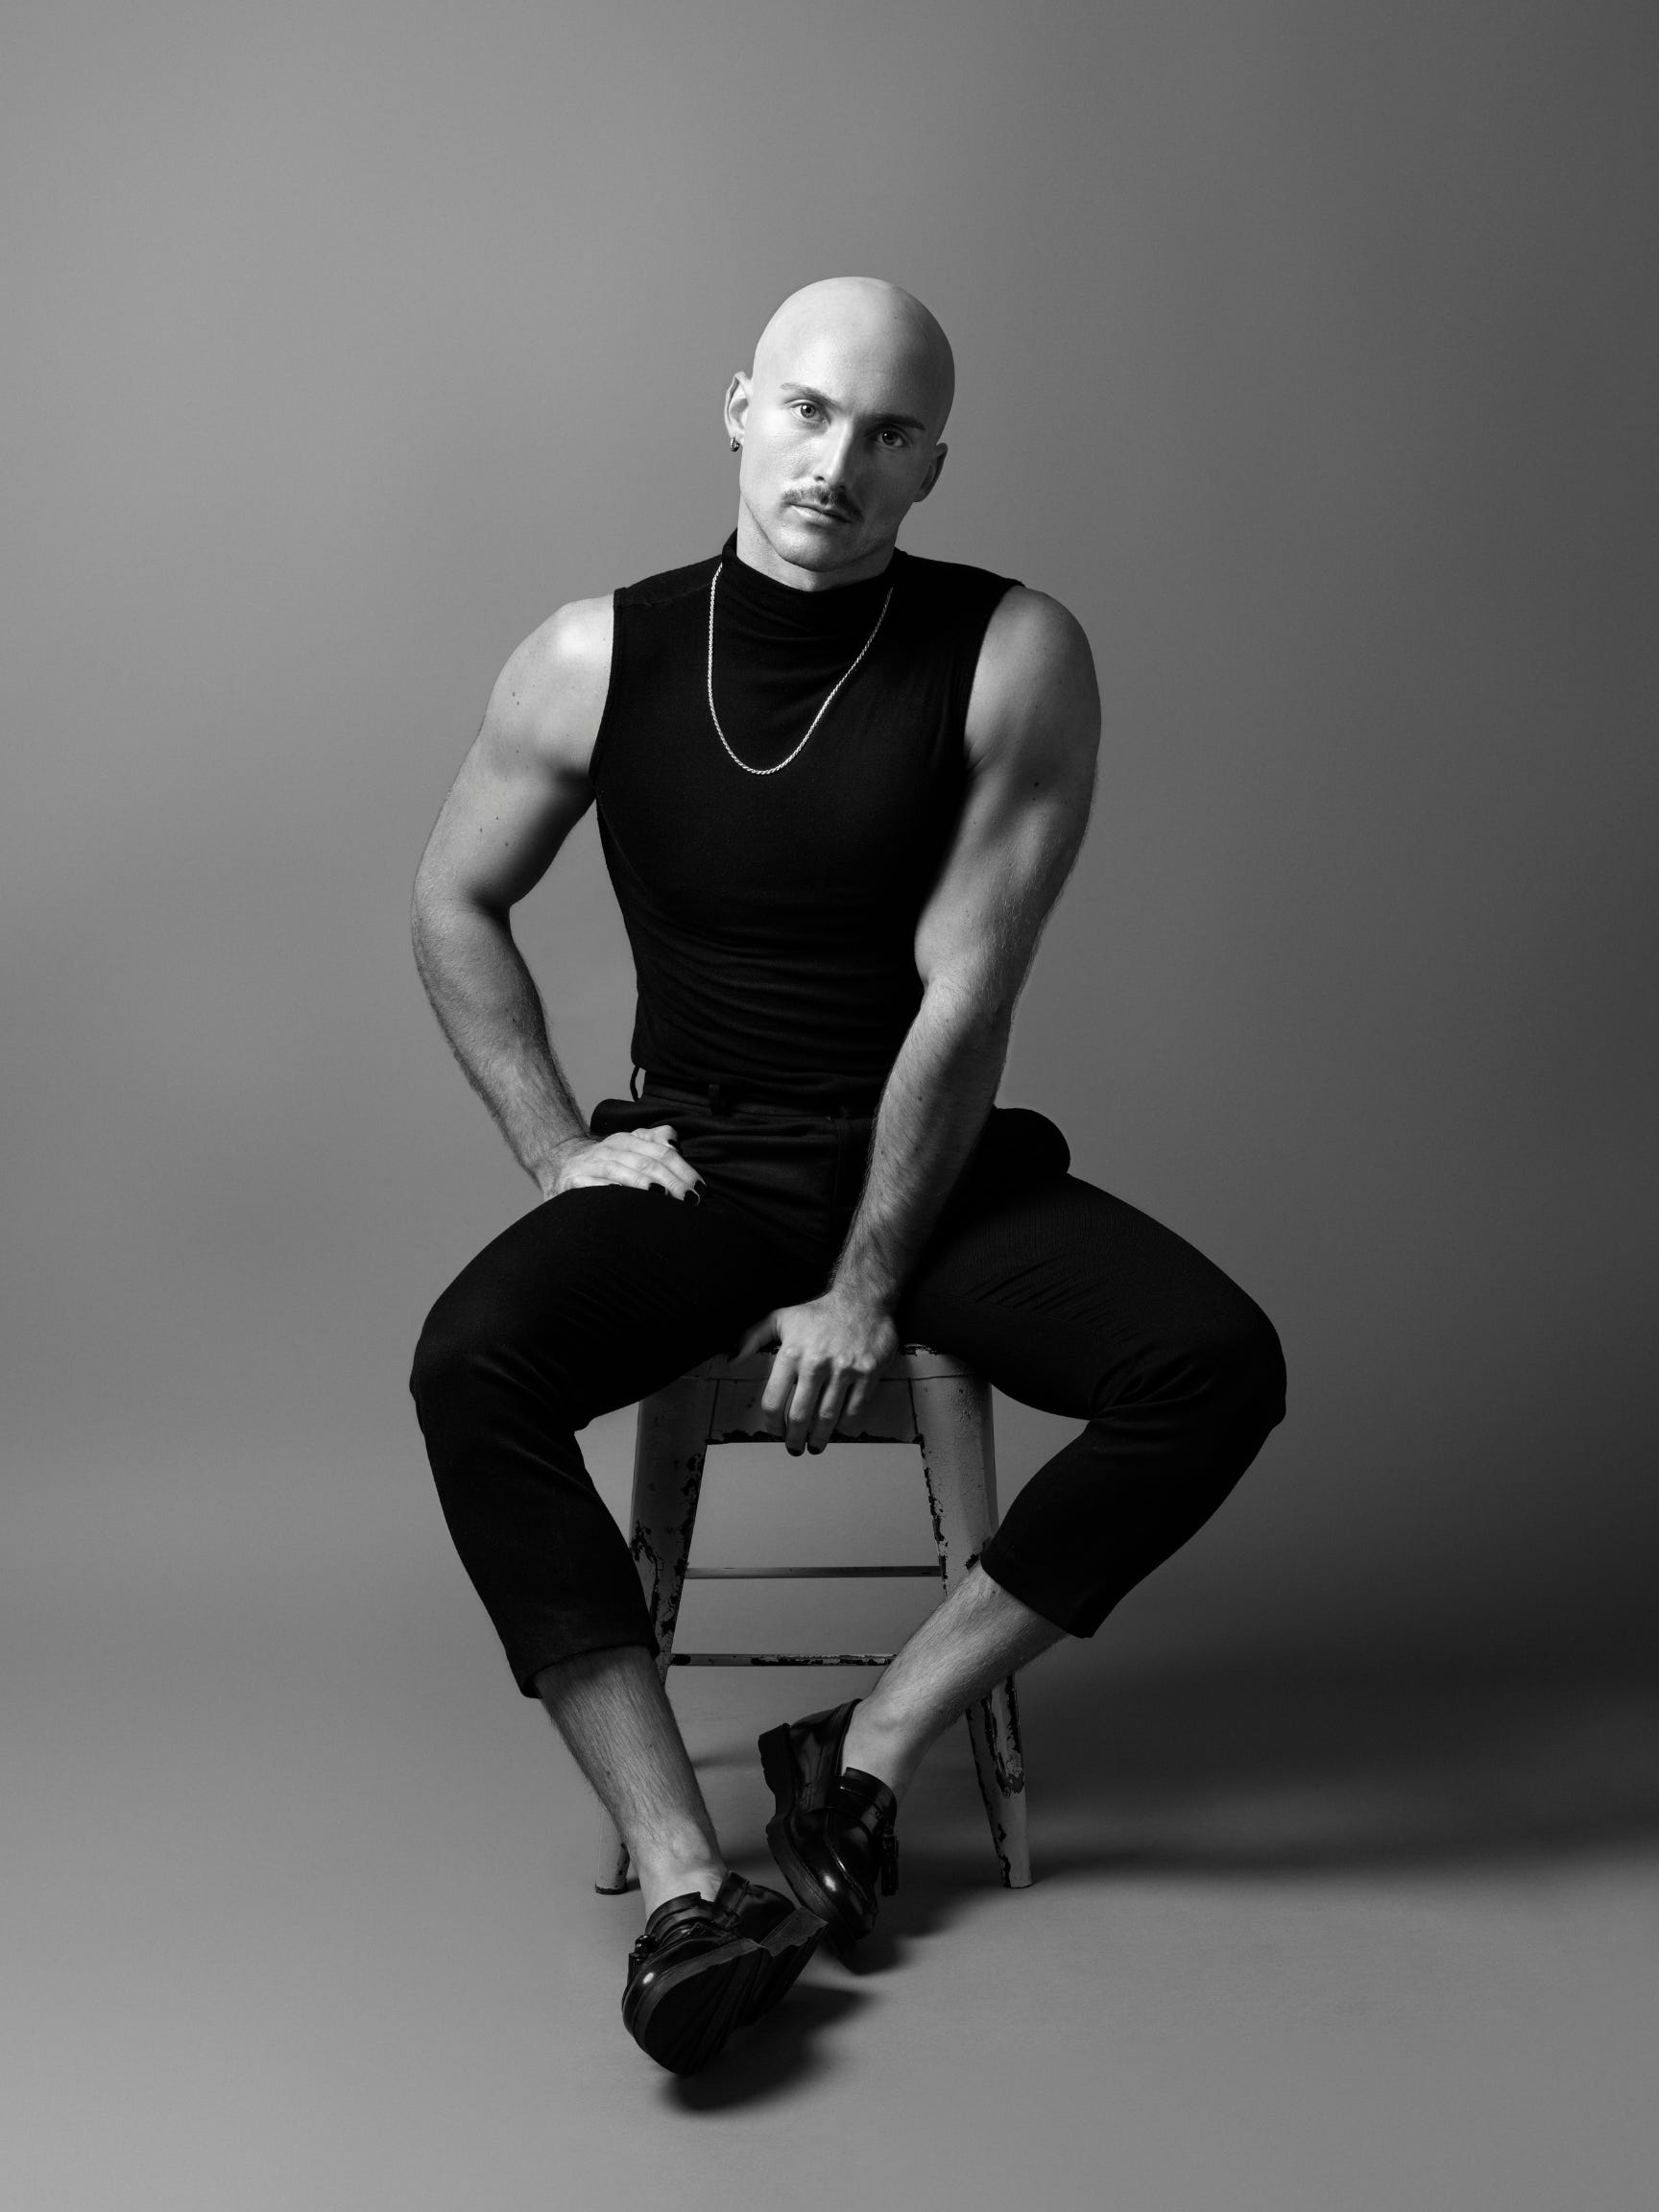 Seated on a stool, Logan is a white person with a mustache and shaved head, wearing a black sleeveless top, silver chain necklace, black pants, and black shoes. They stare directly into the camera without smiling. Photo credit: Hampus Danielsson